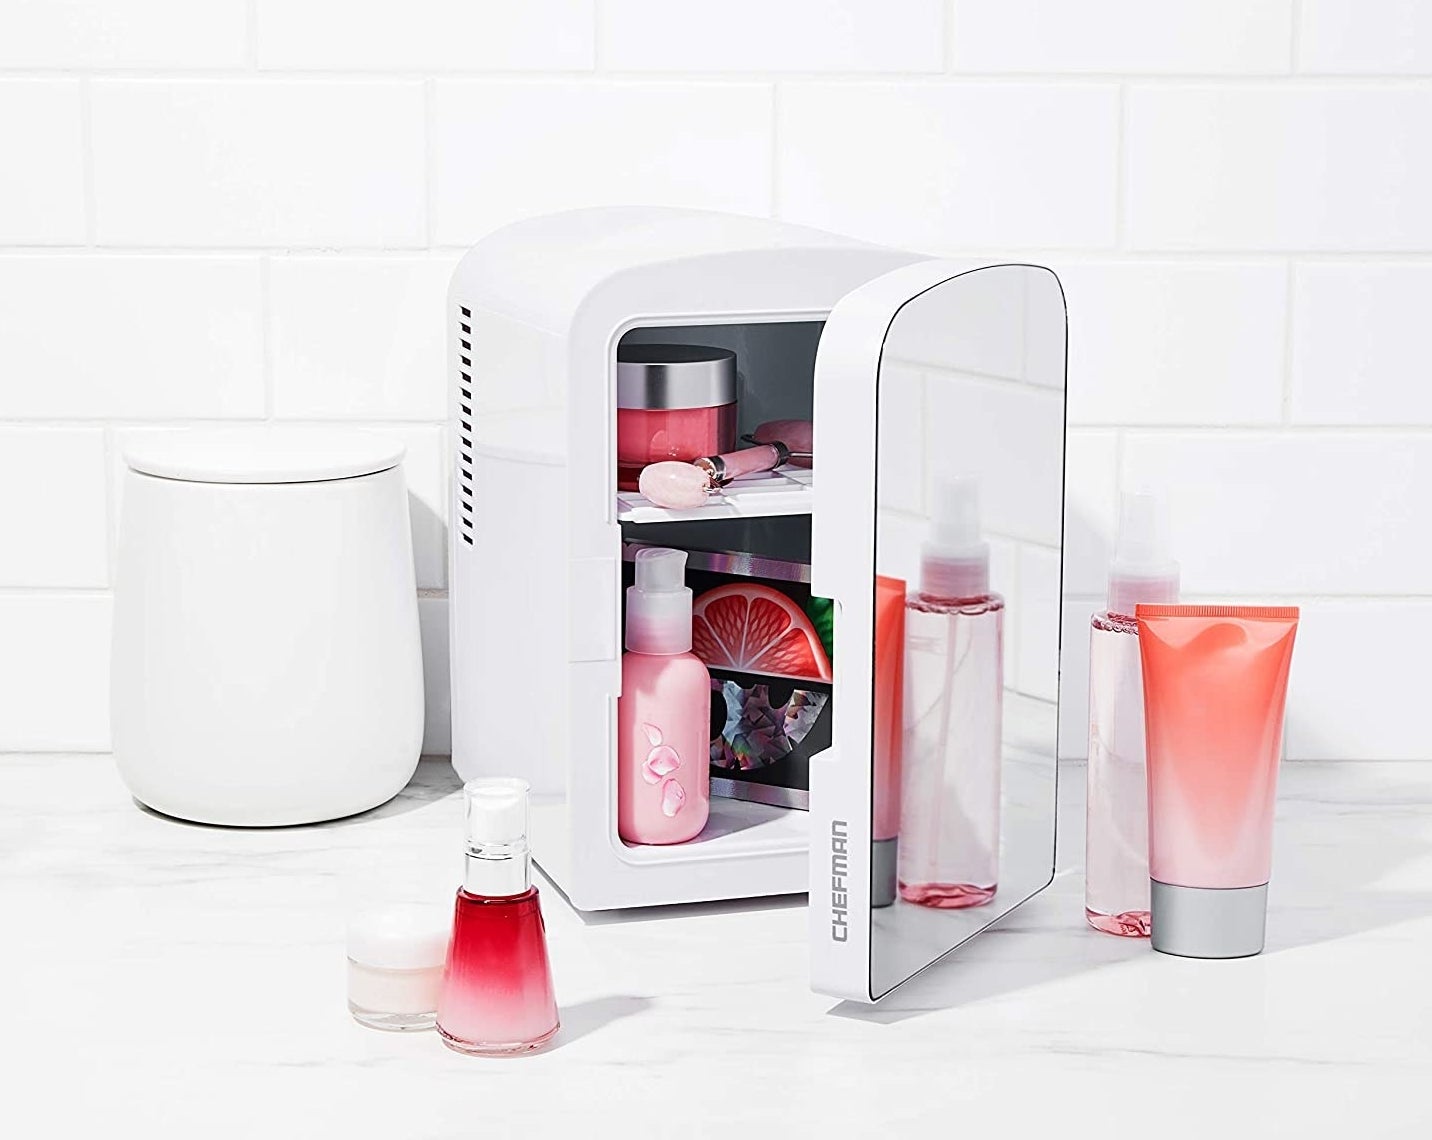 A mirrored mini fridge filled to the brim with skincare products